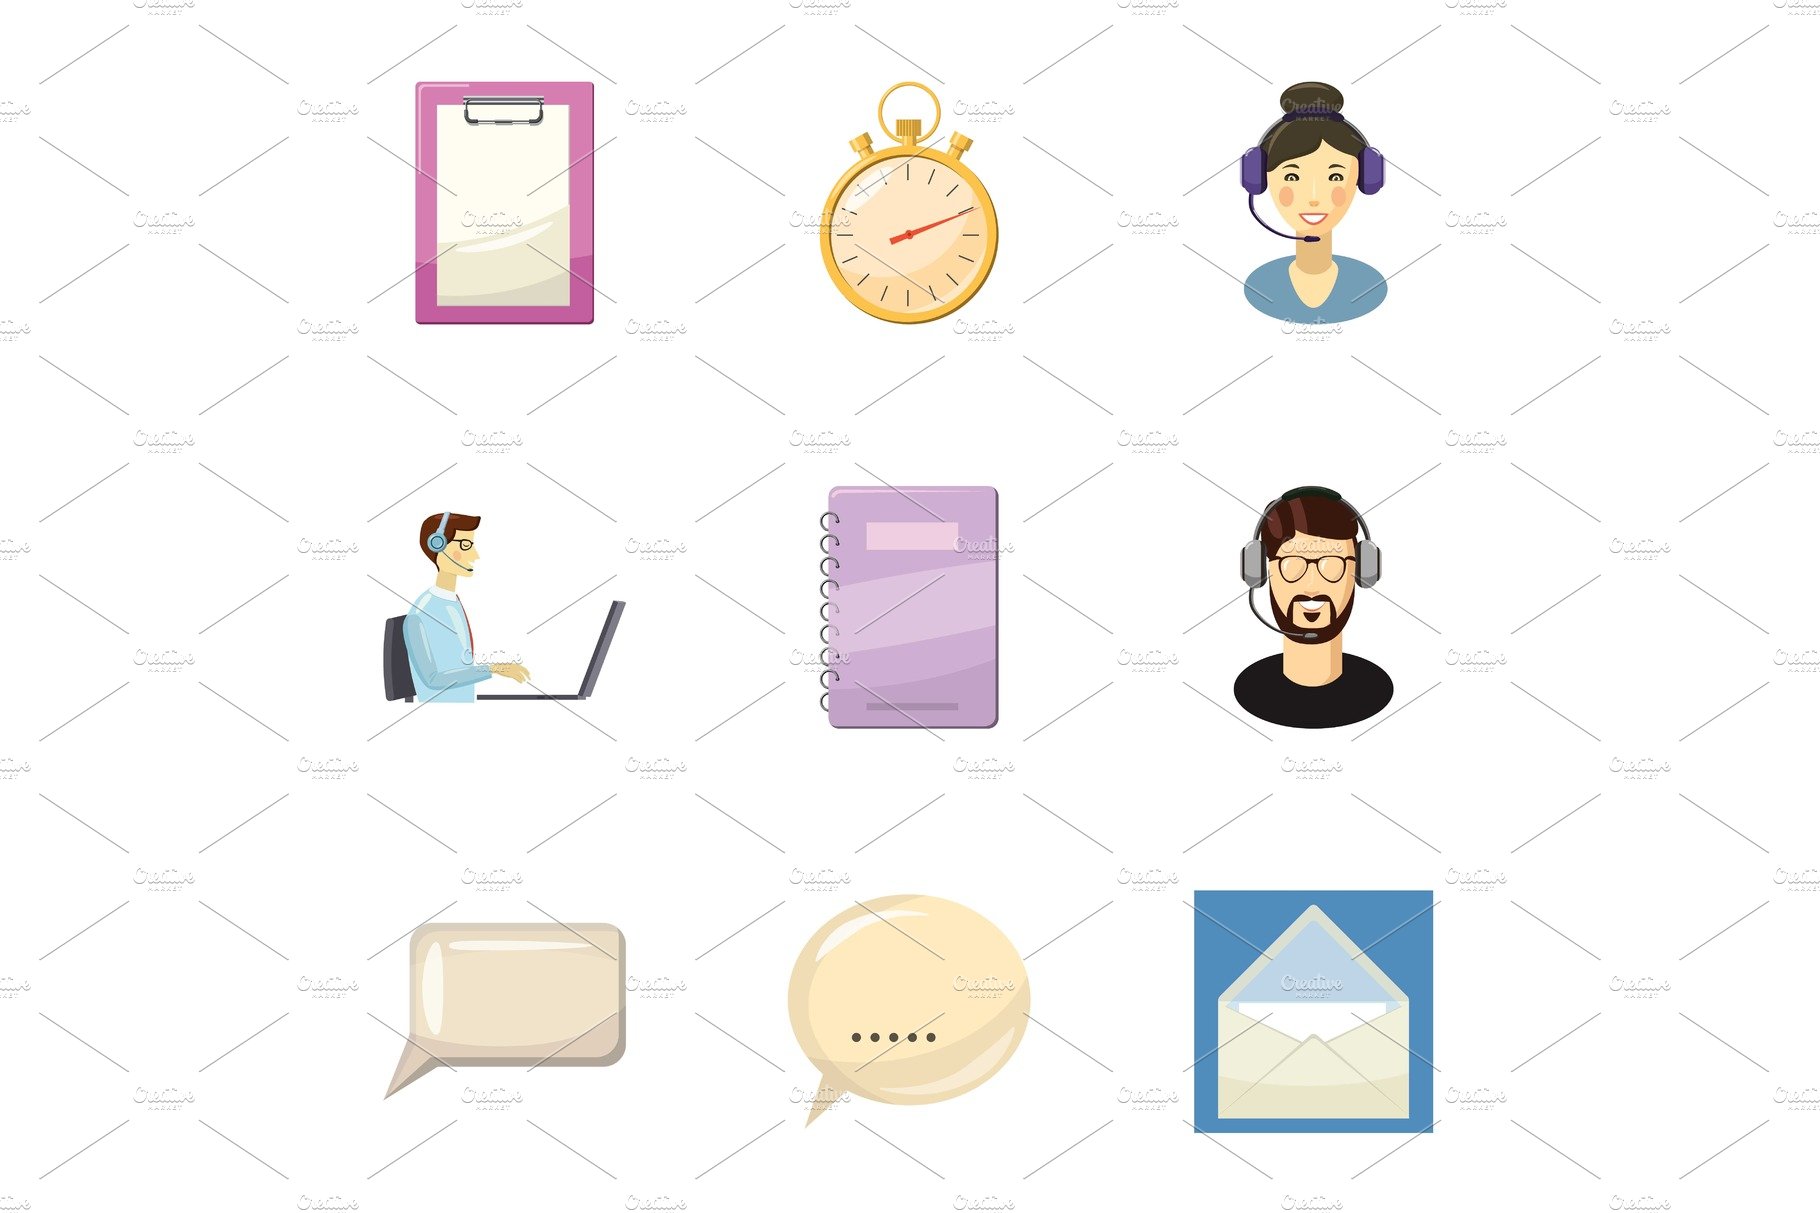 Customer support icons set, cartoon cover image.